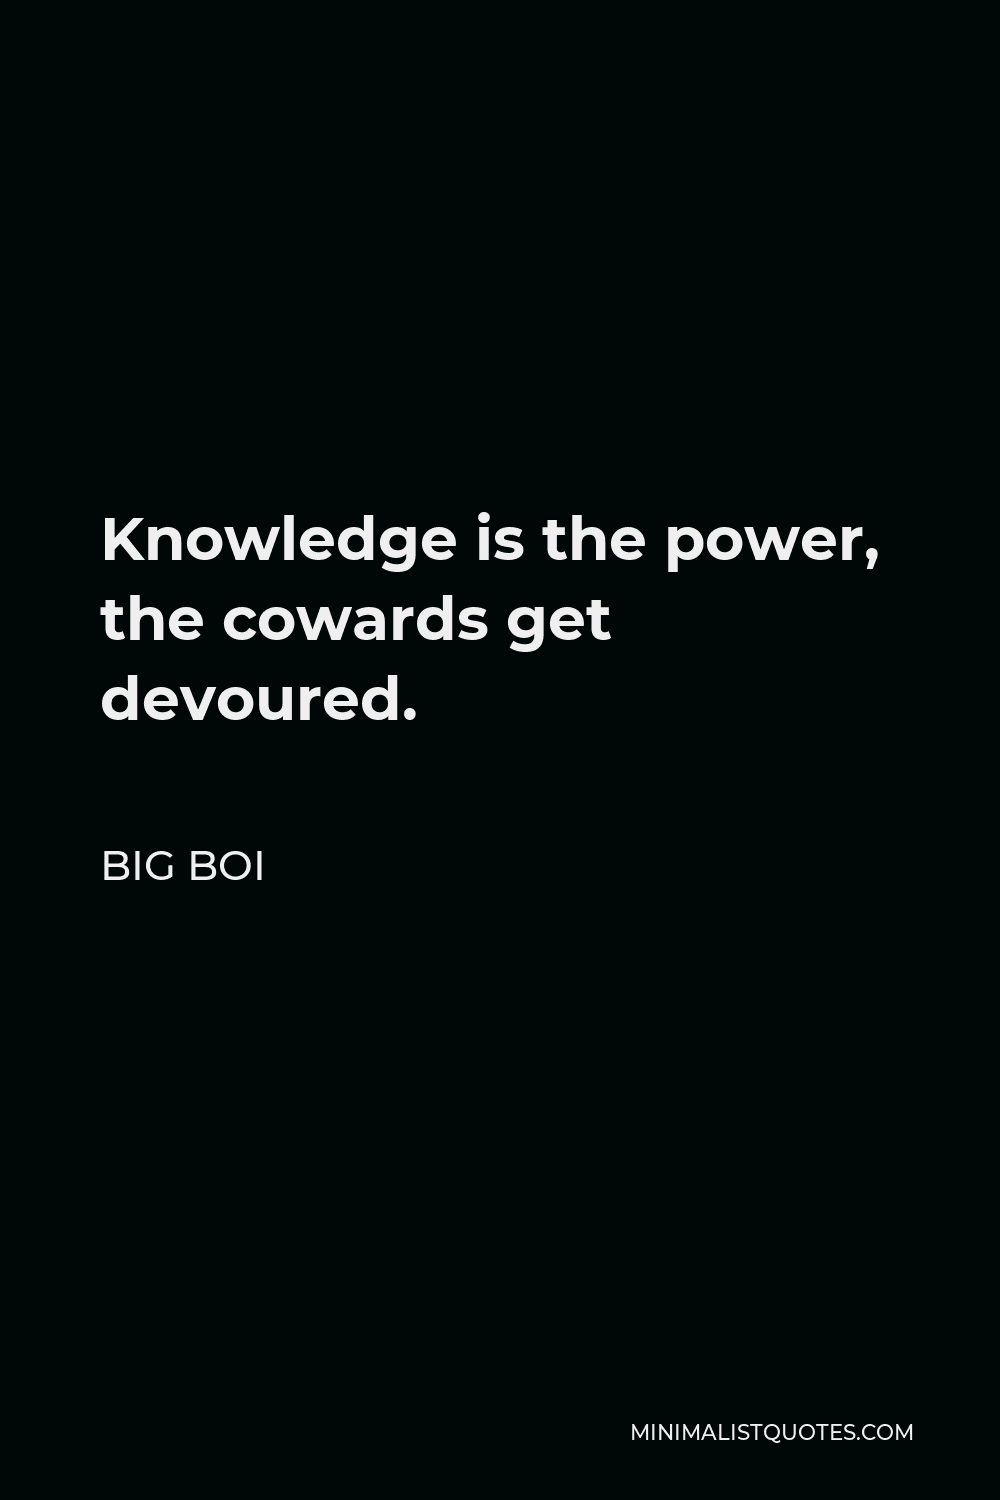 Big Boi Quote - Knowledge is the power, the cowards get devoured.